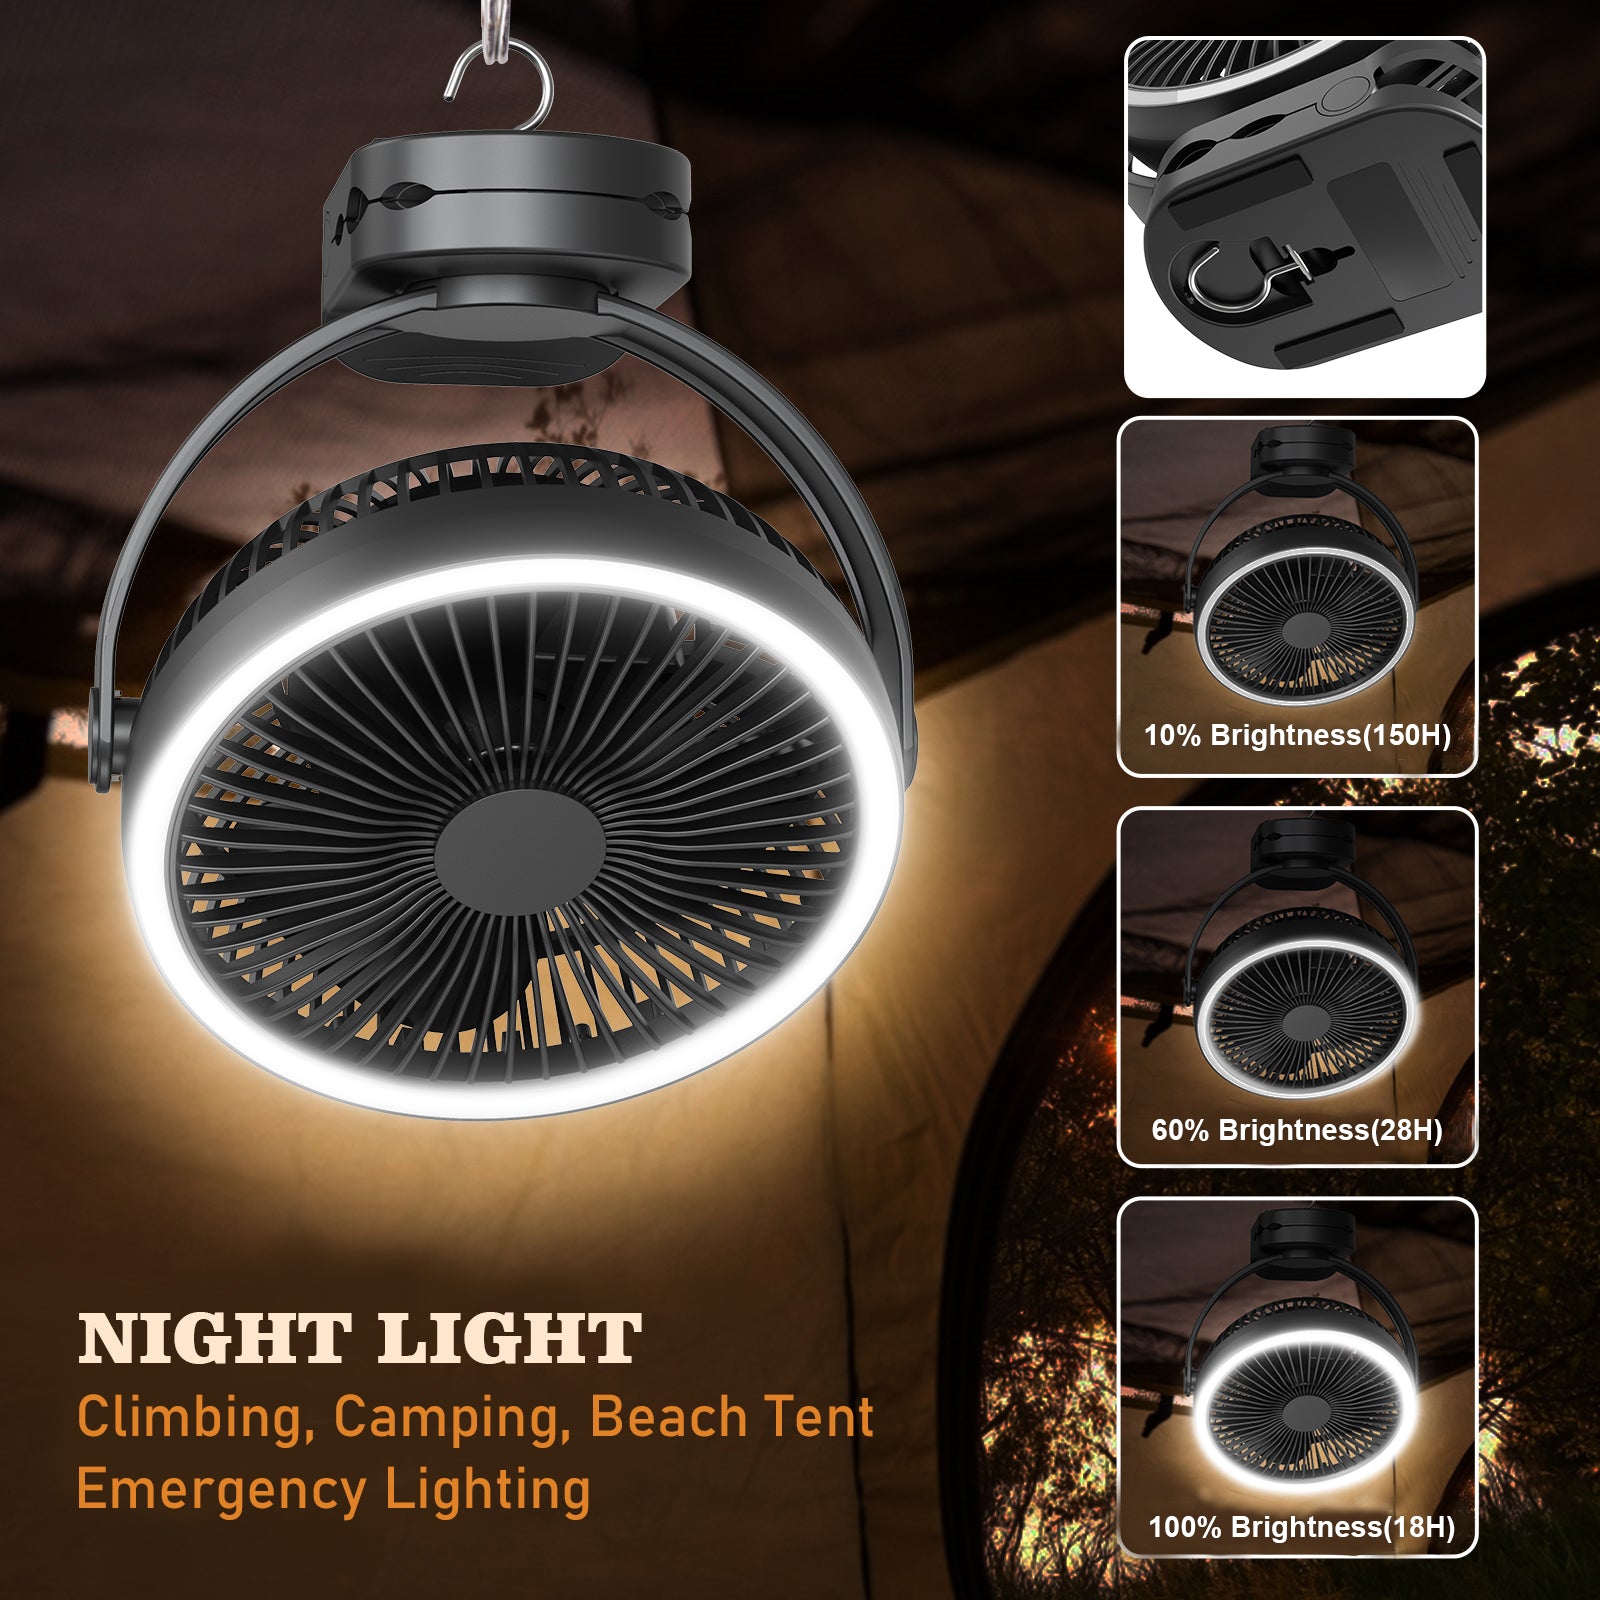 Lighting Ever LED light review for emergencies, camping, outdoor use 